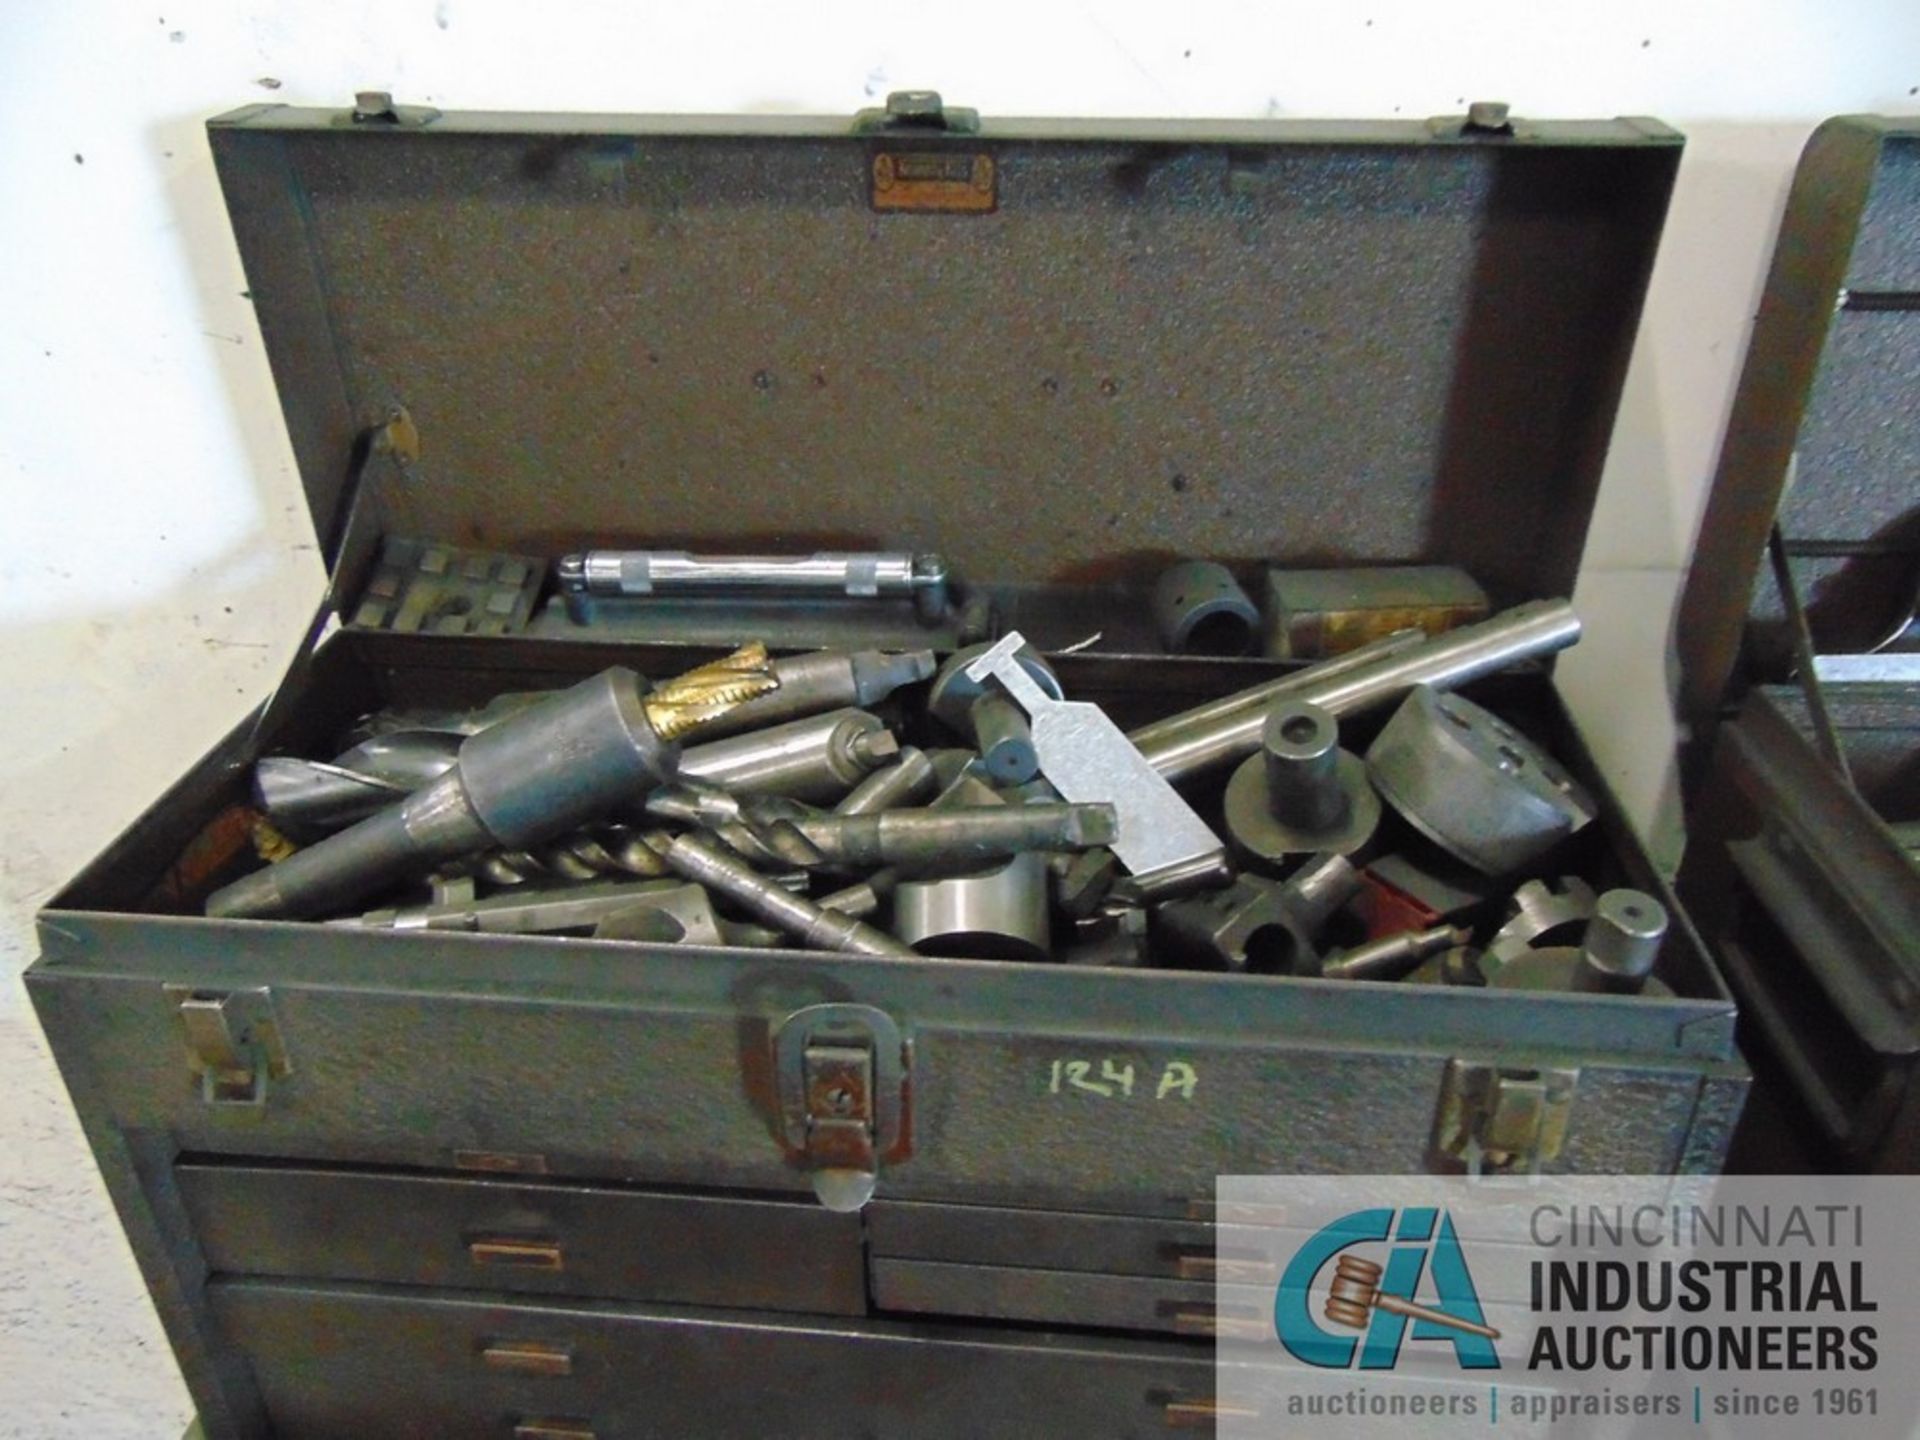 MACHINISTS TOOLBOXES W/ CONTENTS & CONTENTS OF BENCH - Image 2 of 7